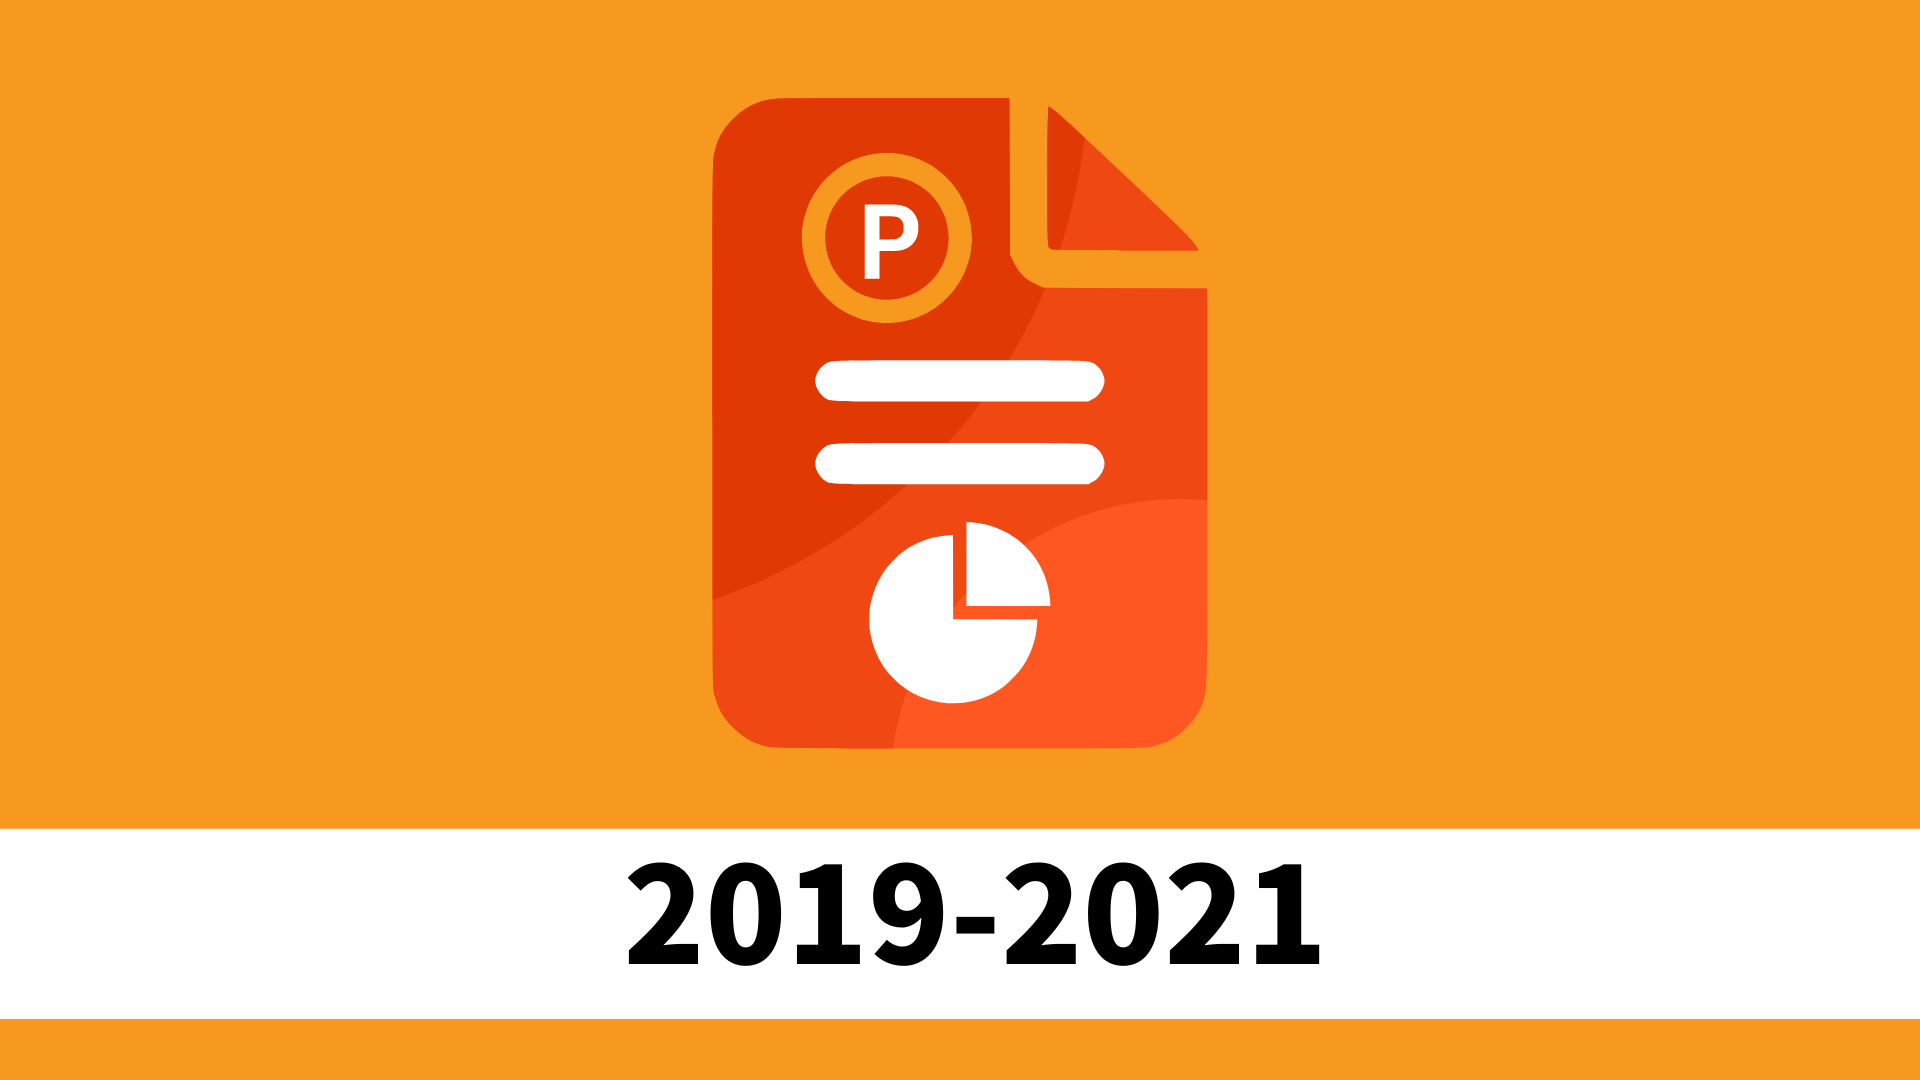 PowerPoint 2019-2021 Learning（入門から活用まで）